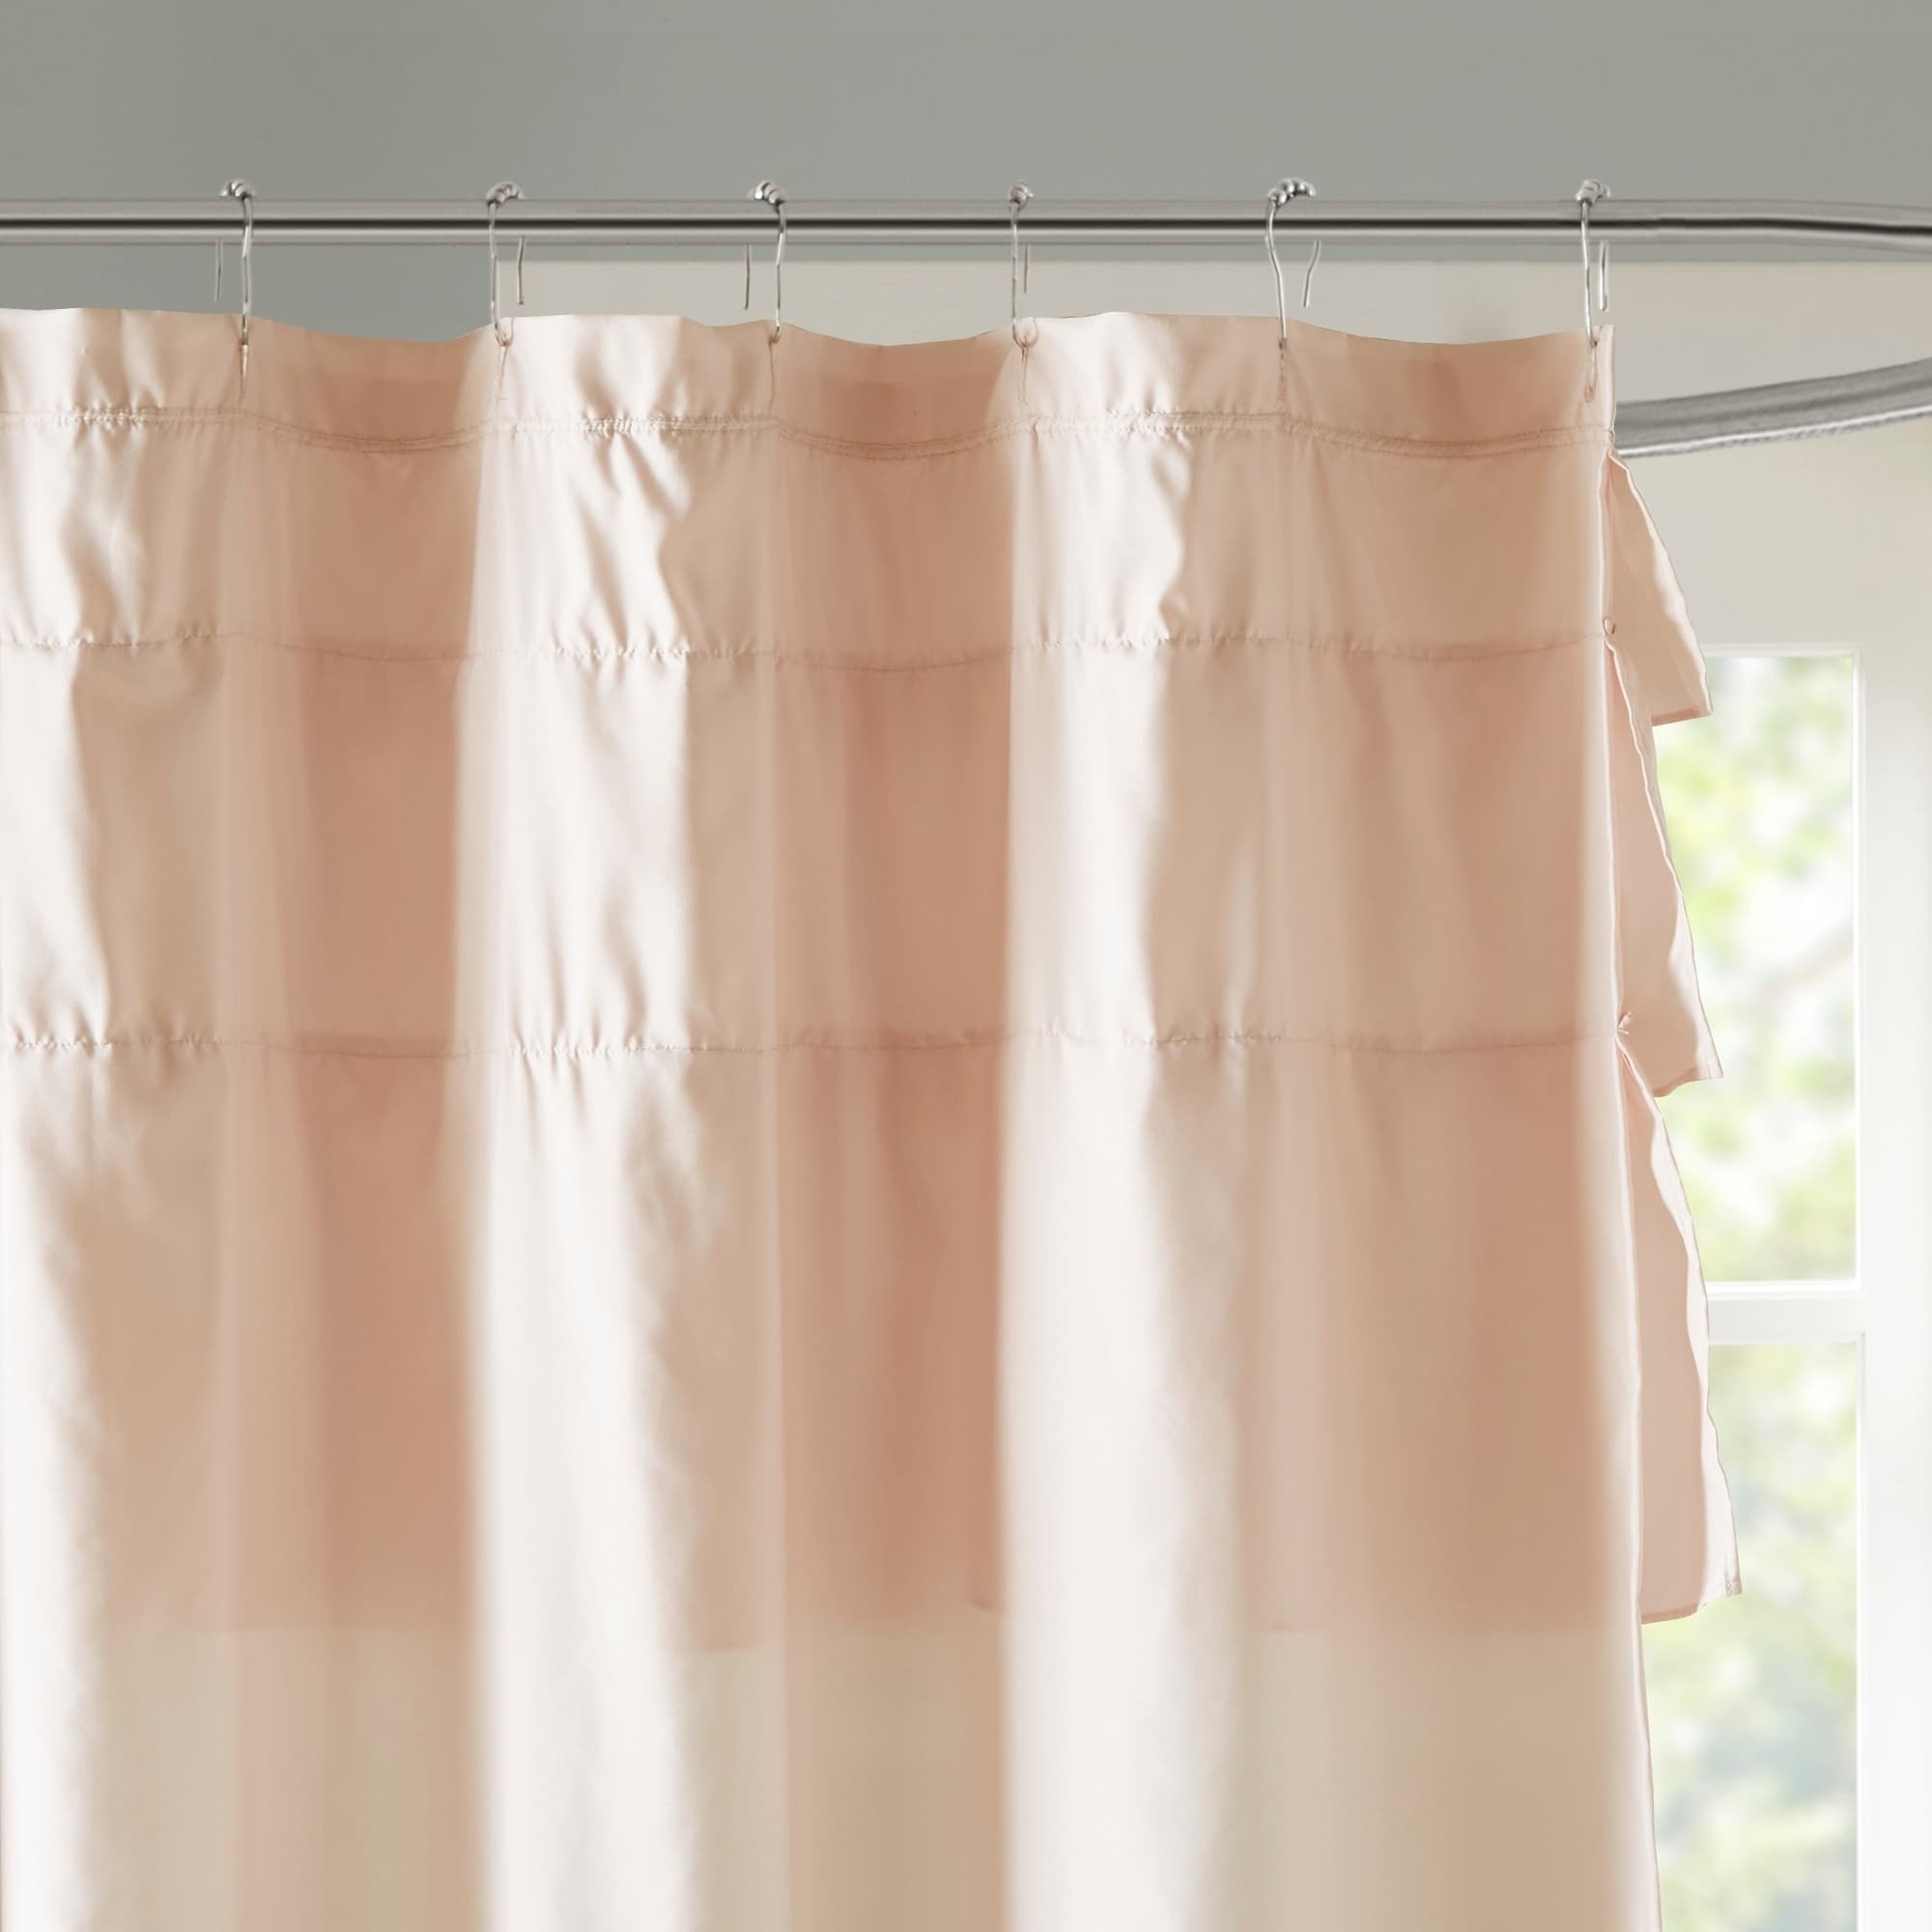 Ruffled Curtain Over Glass Shower Door - Redhead Can Decorate